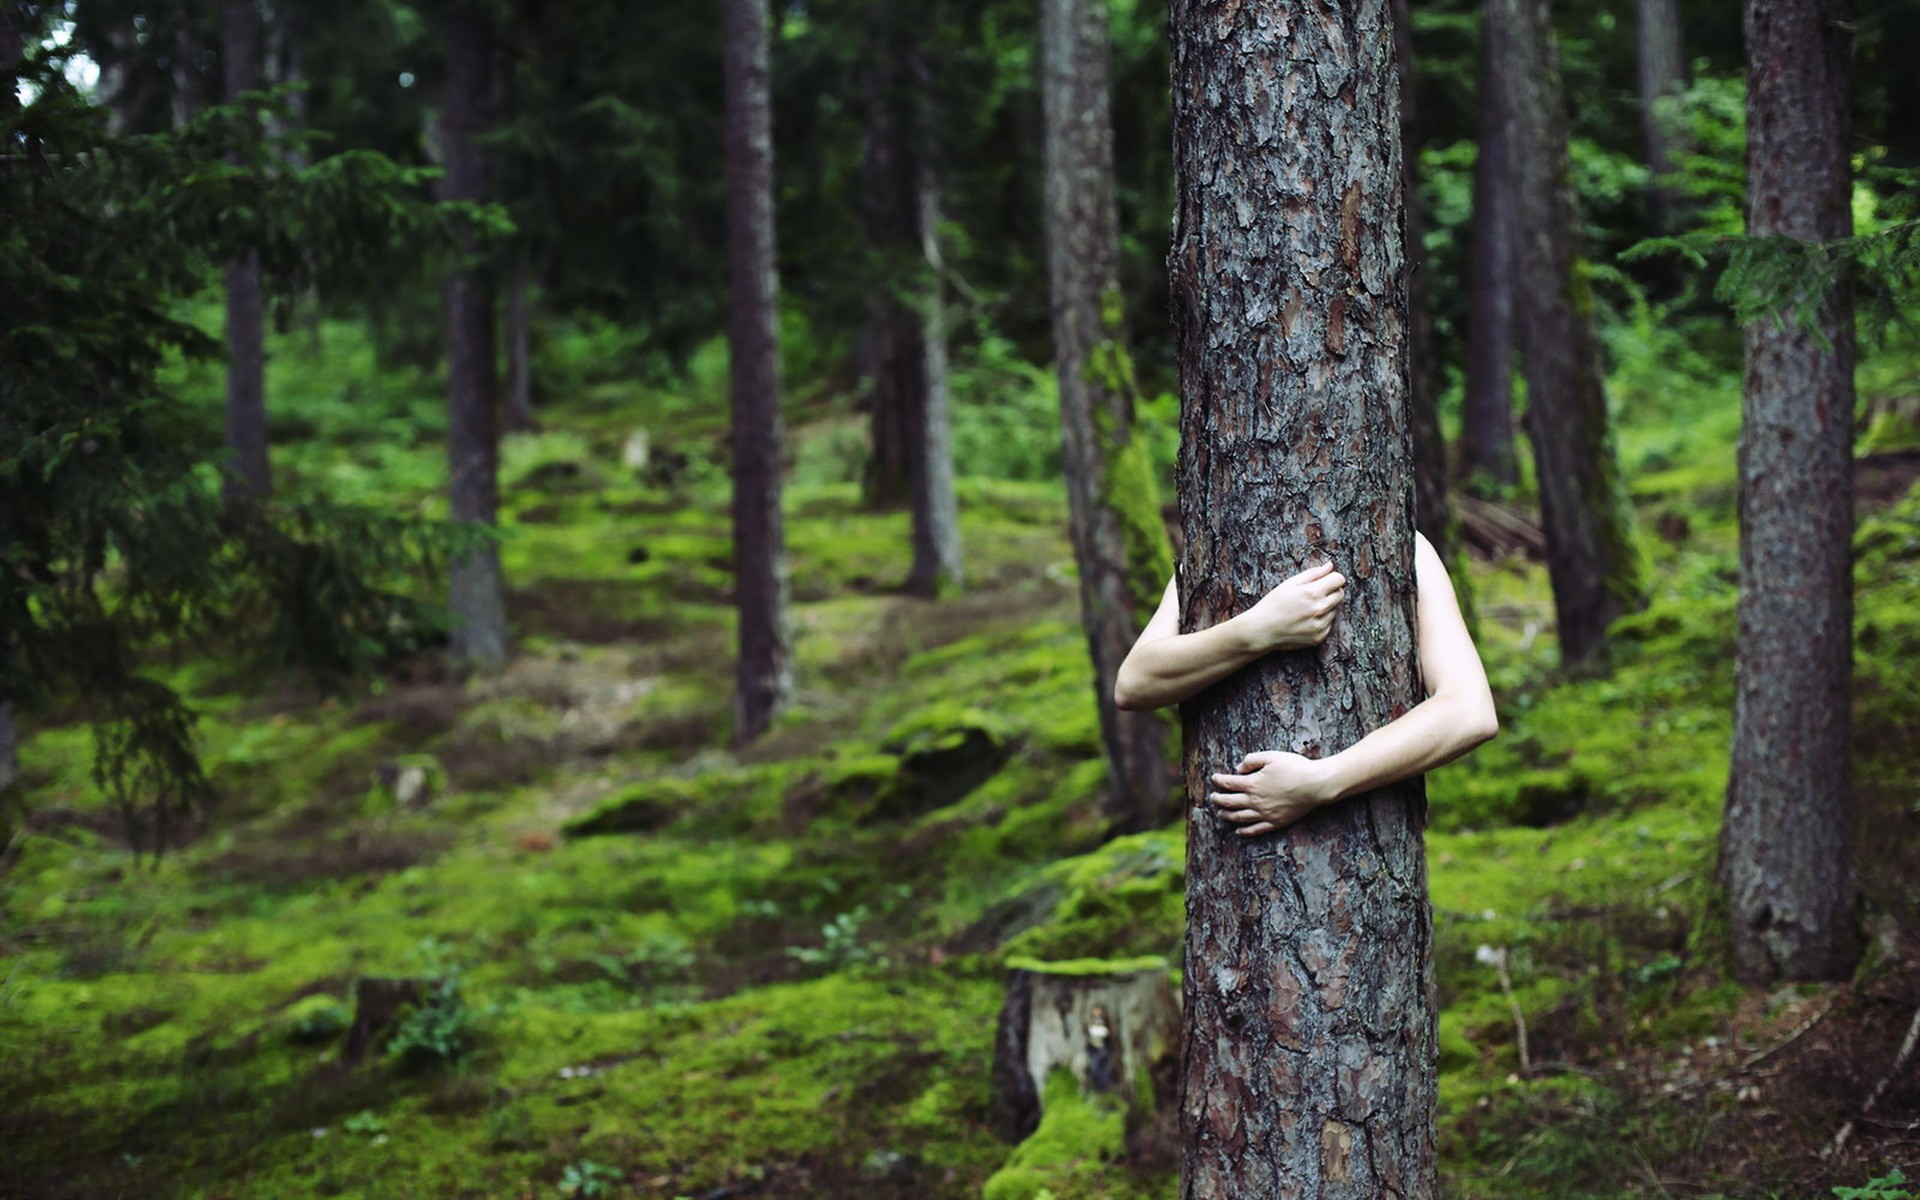 General 1920x1200 trees forest tree trunk arms hugging green moss pine trees women outdoors outdoors model plants women